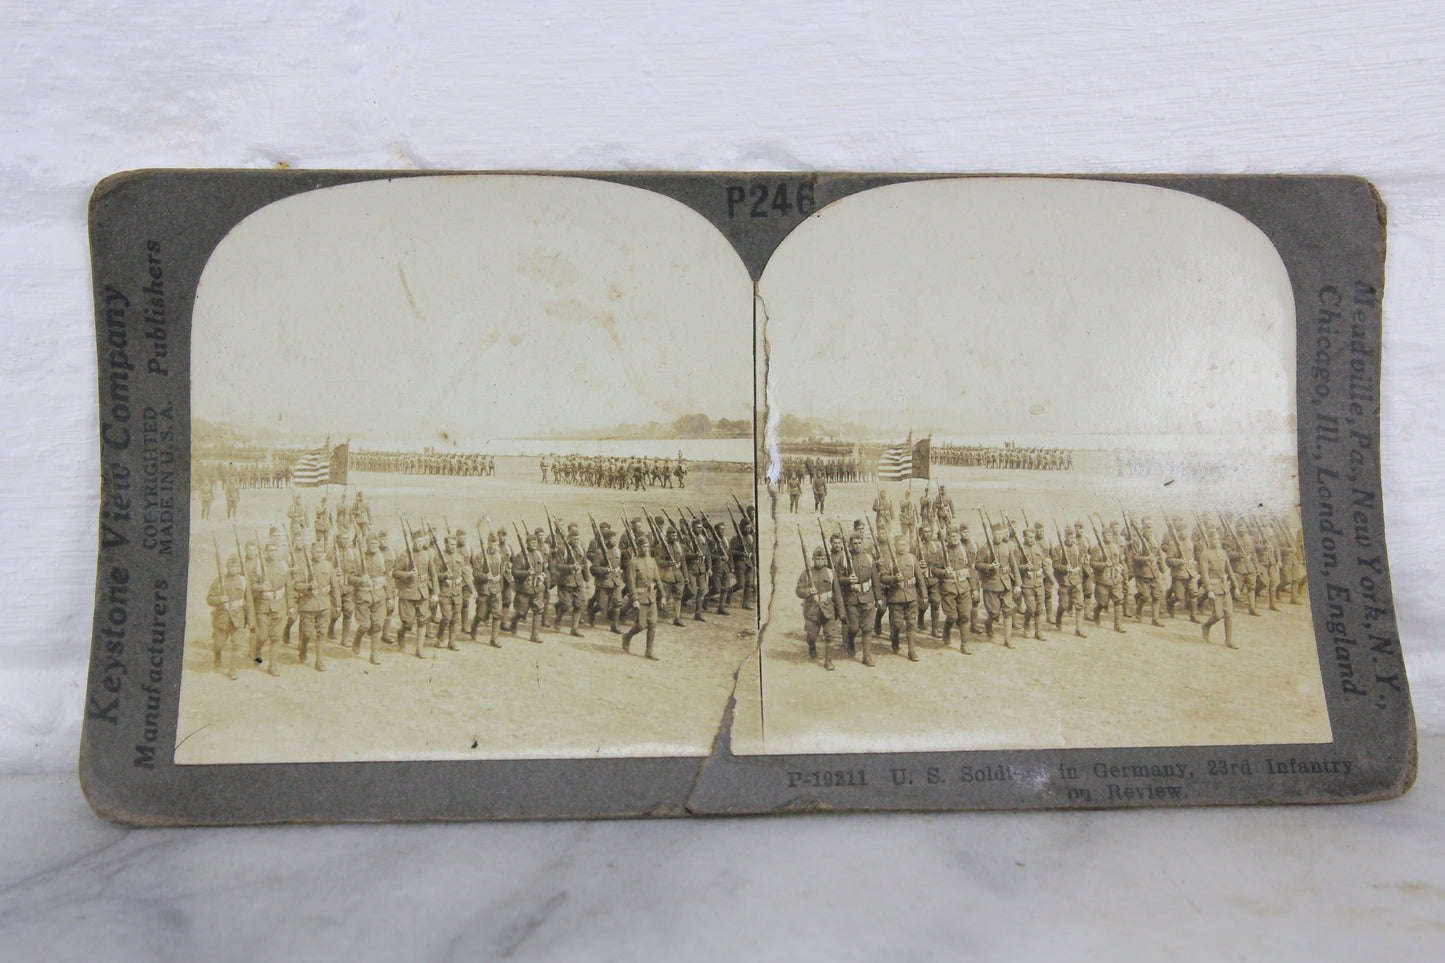 U.S. Soldiers in Germany, 23rd Infantry on Review - Keystone Stereo Card